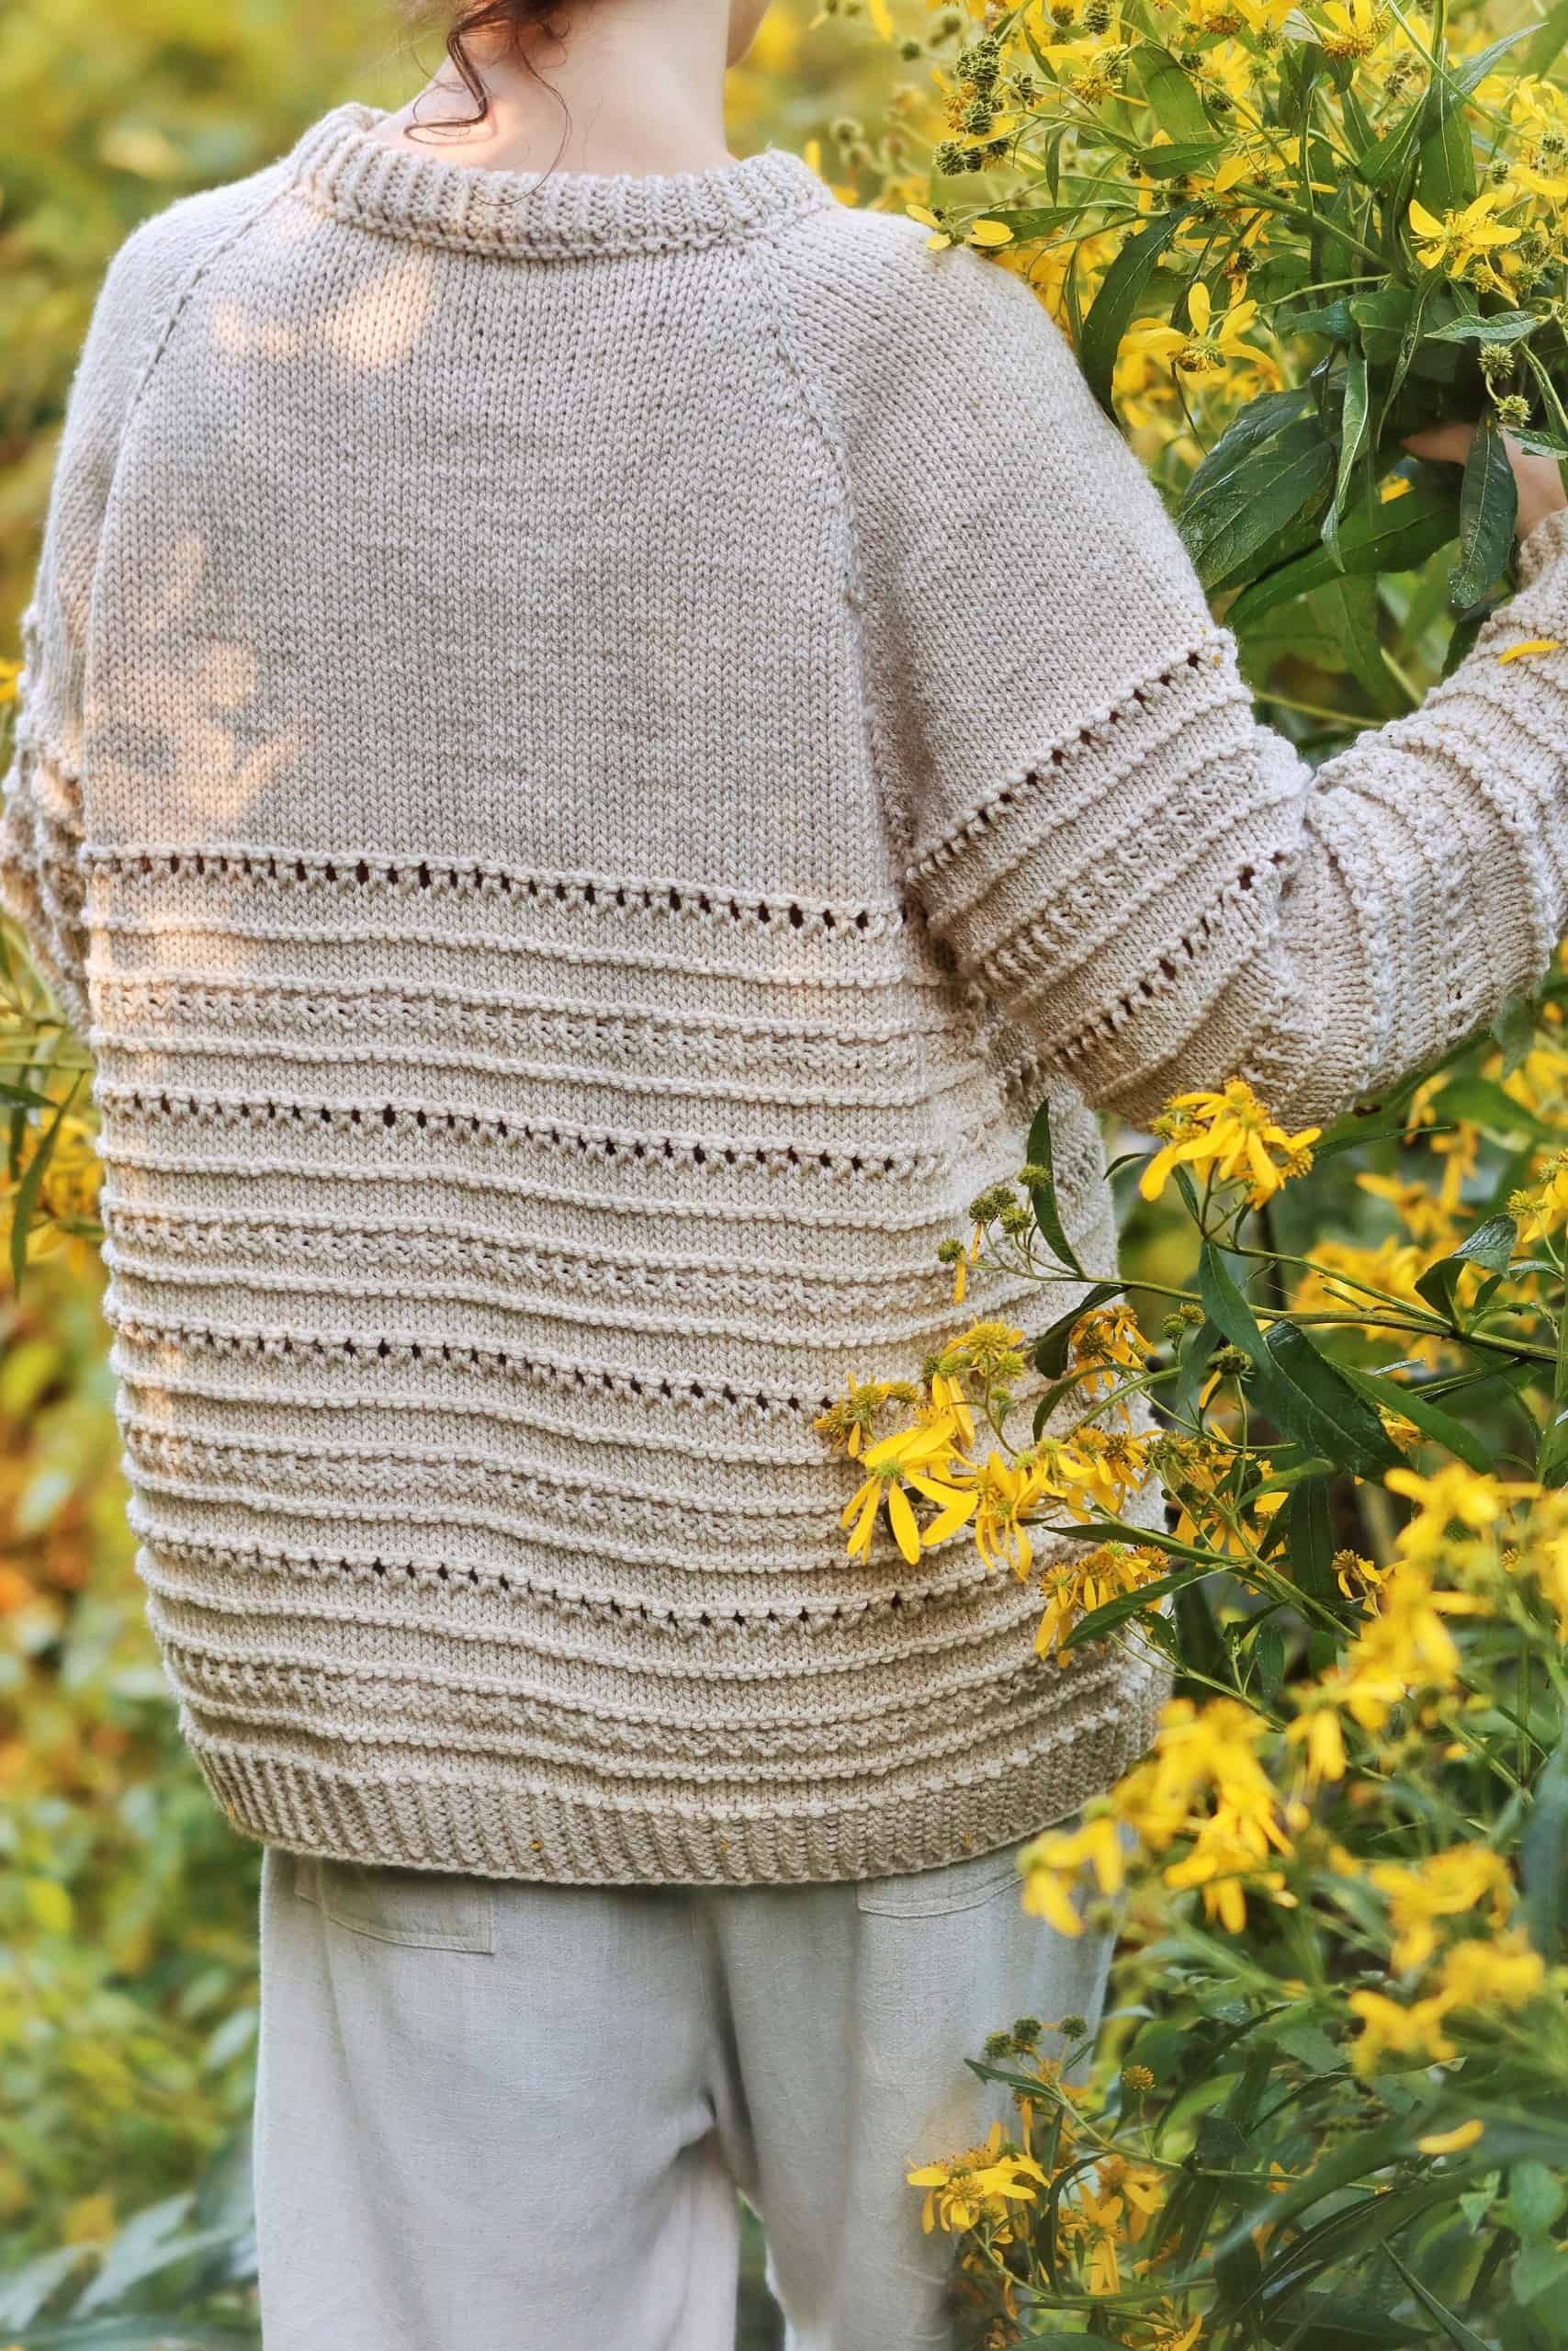 Dazzling Texture & Lace for The Countryside Sweater Knitting Pattern -